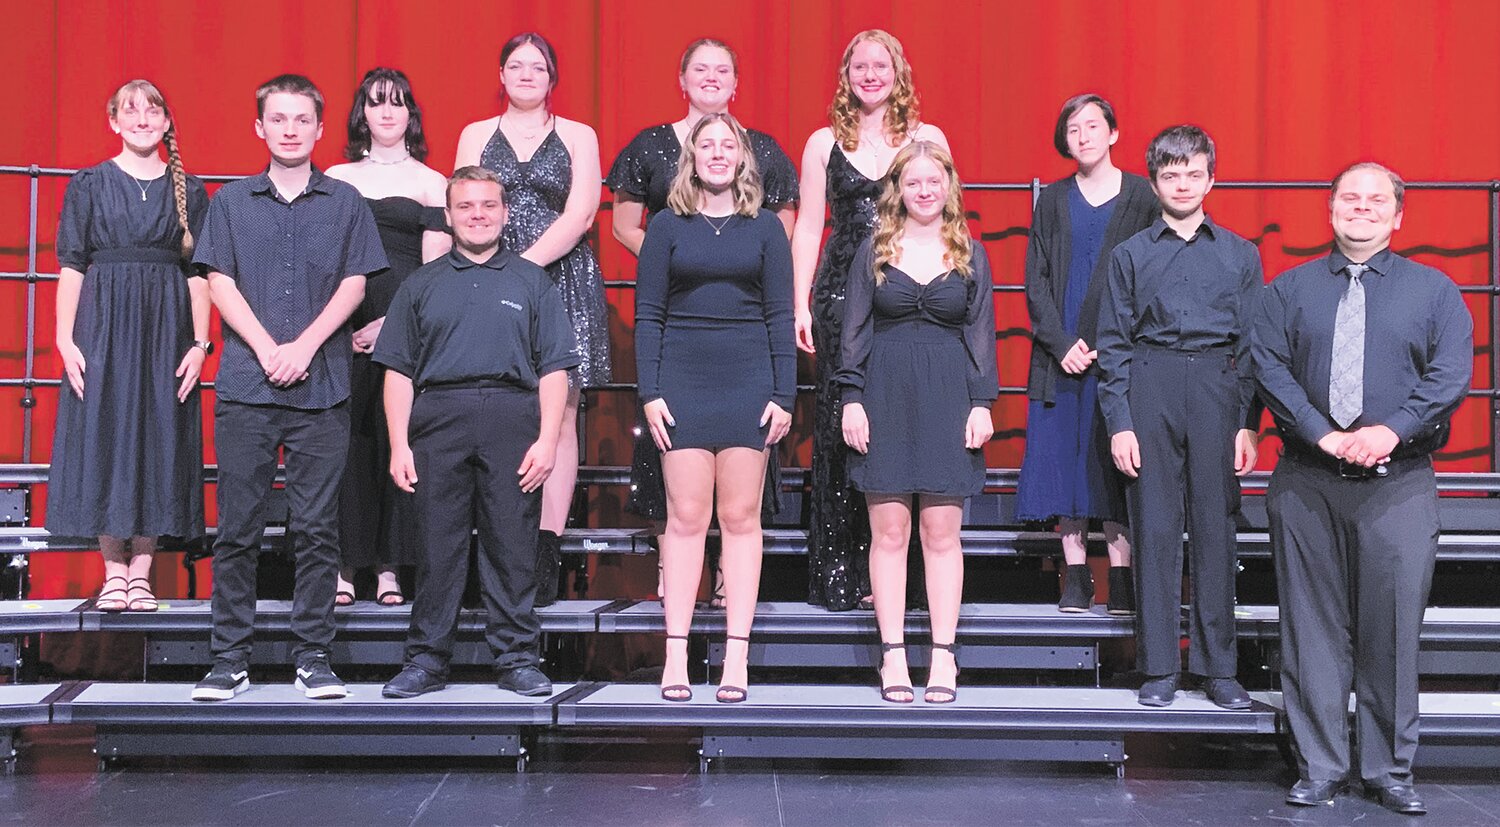 Members of the Parke Heritage High School choir performed at the Annual WRC Choral Festival at Seeger High School on Oct. 5. The PHHS choir joined with the Riverton Parke High school choir to perform their own special selection before combining with the choirs from the other WRC schools. Parke Heritage performed “The Rose” arranged by Julie Knowles. Senior Jenna McVay was selected for a solo part for the song, “Don’t Stop Me Now” by Queen. The guest clinician was Professor Laura Saunders from Colorado Christian University. Members attending are, front row, Michael Clingerman, AJ Montgomery, Kimberly Koren, Jaida Lows, Sam Baldwin and Director Alec Moeller; and back row, Ella Lacy, Novel Crabtree, Haylee Burk, Shelby Robertson, Jenna McVay and Megan Shockey.